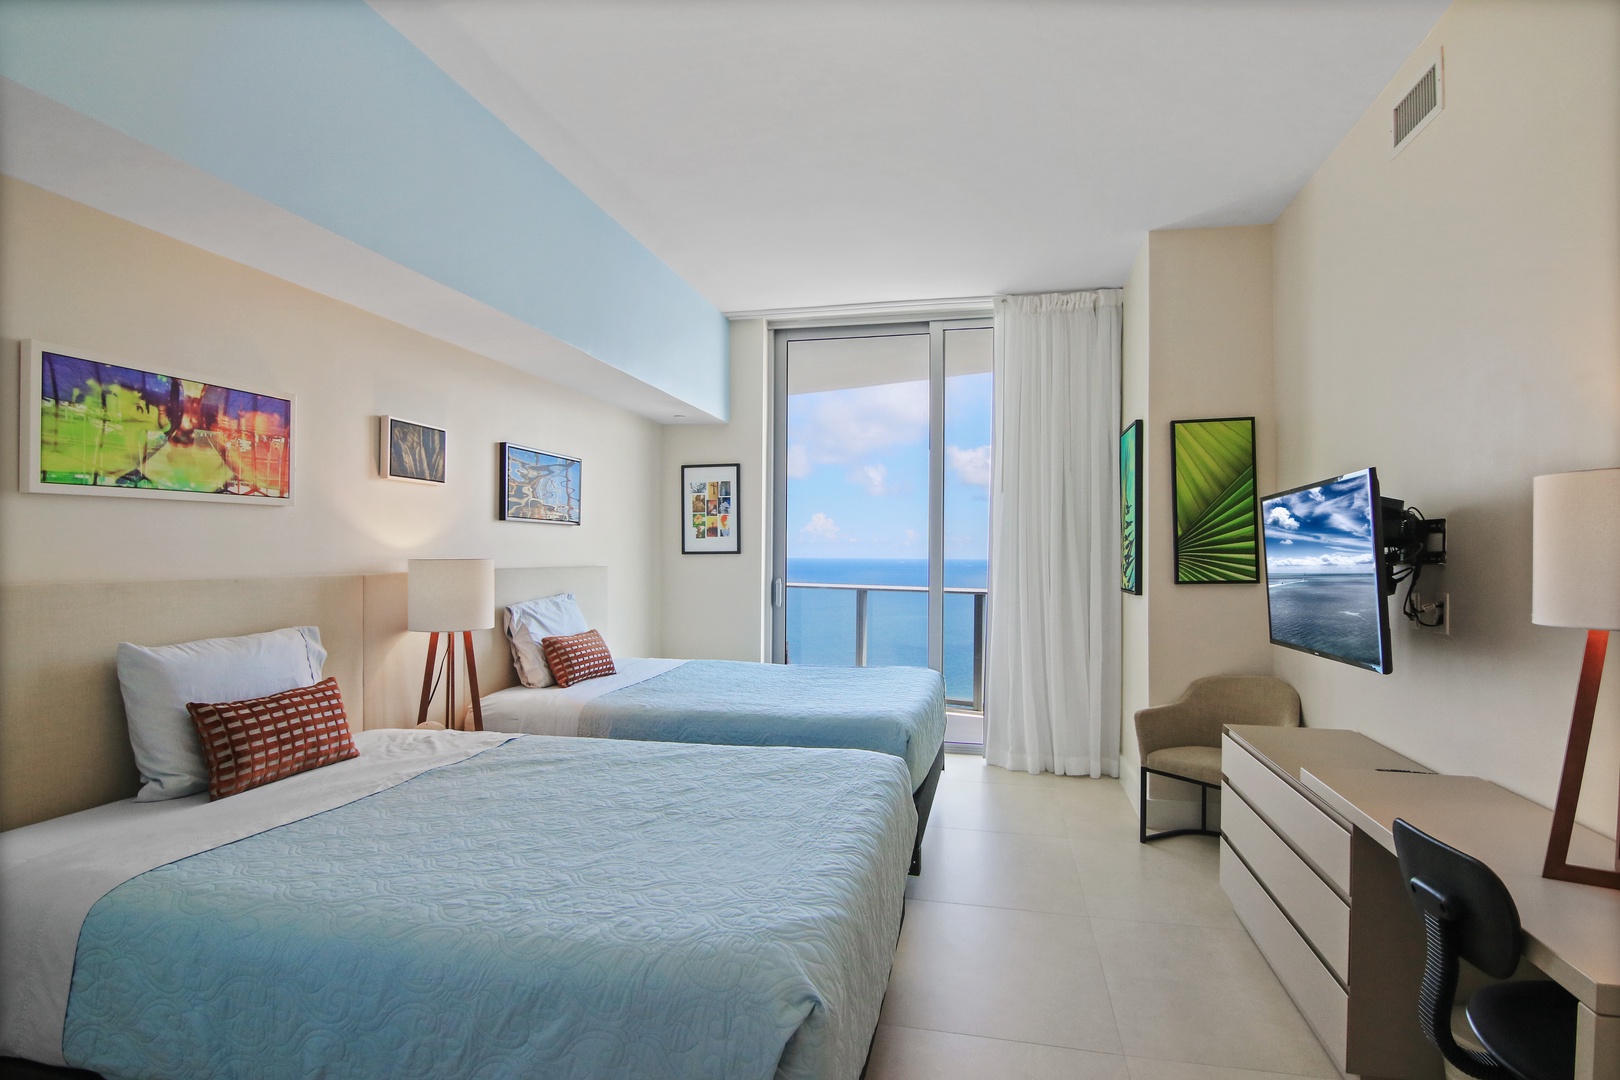 The 2nd of 2 double queen bedrooms offers a Smart TV, desk, & balcony access